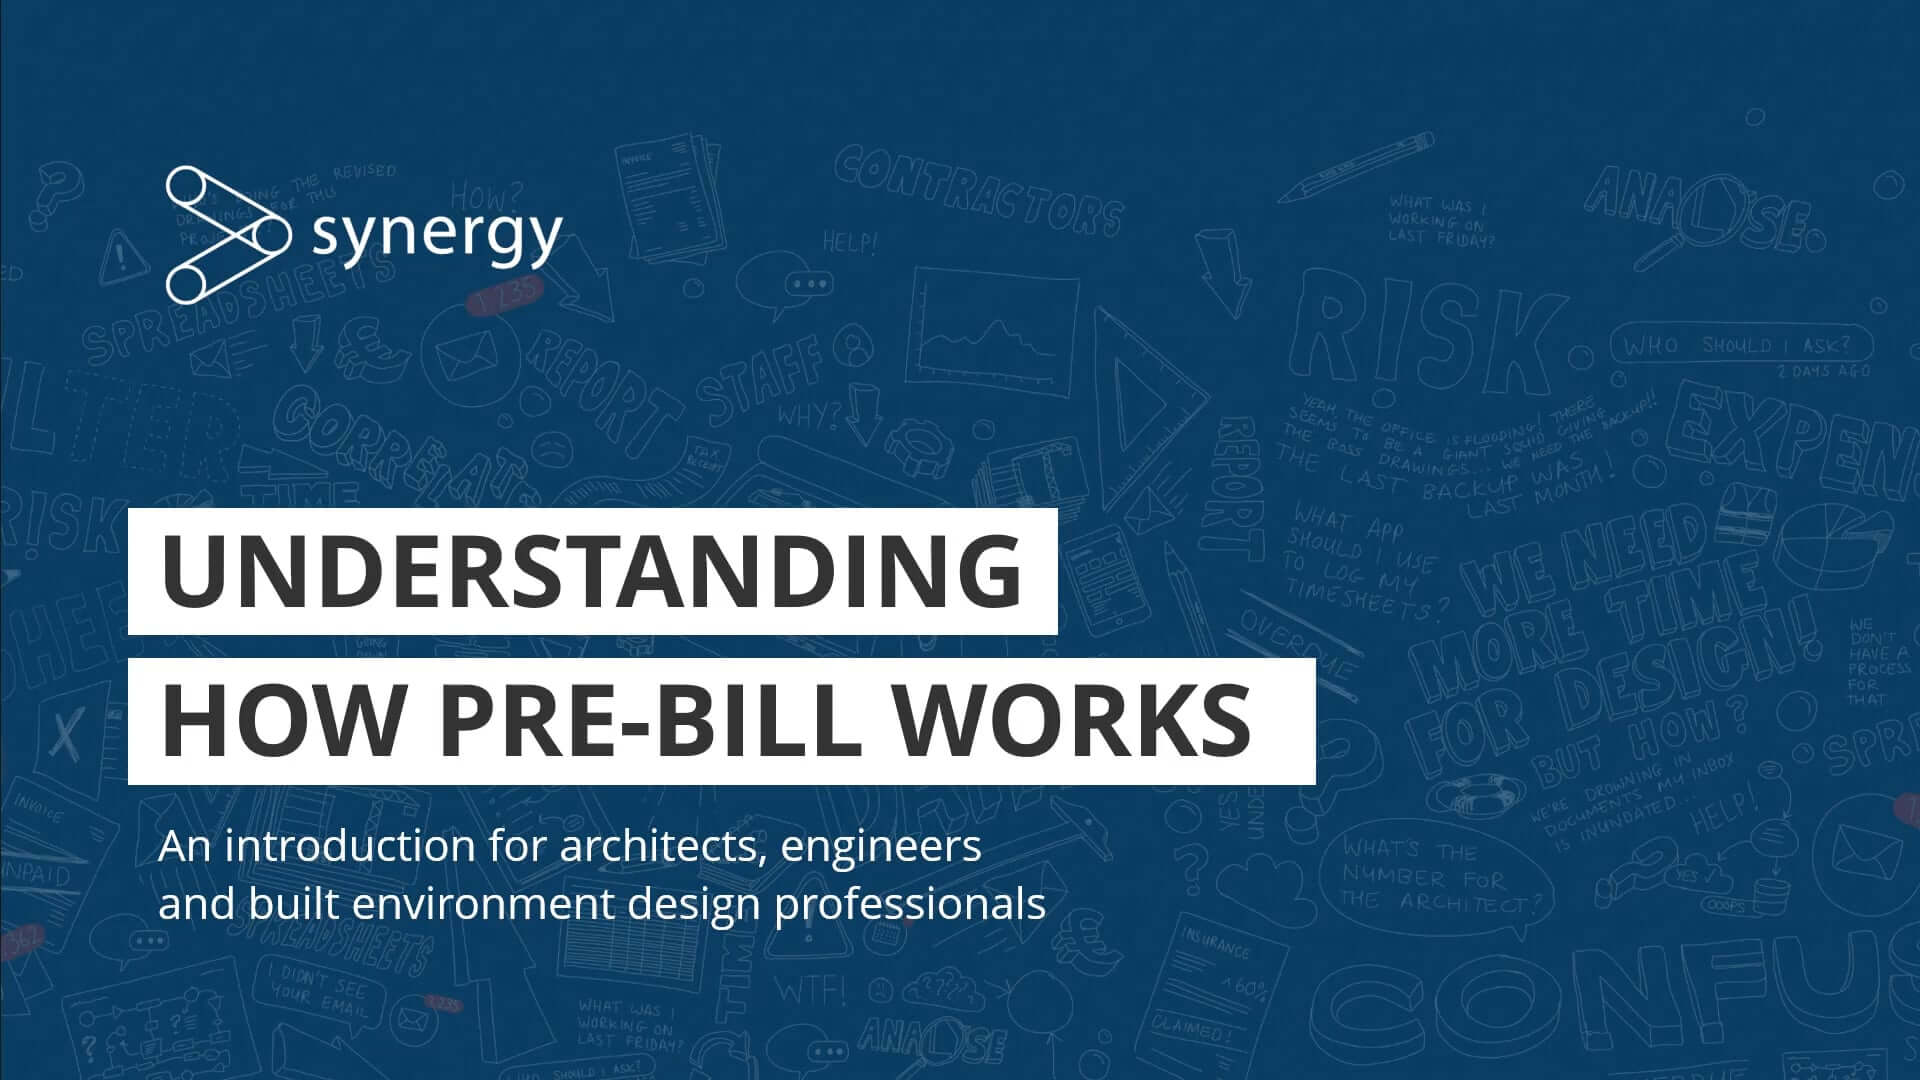 Synergy pre-bill invoicing